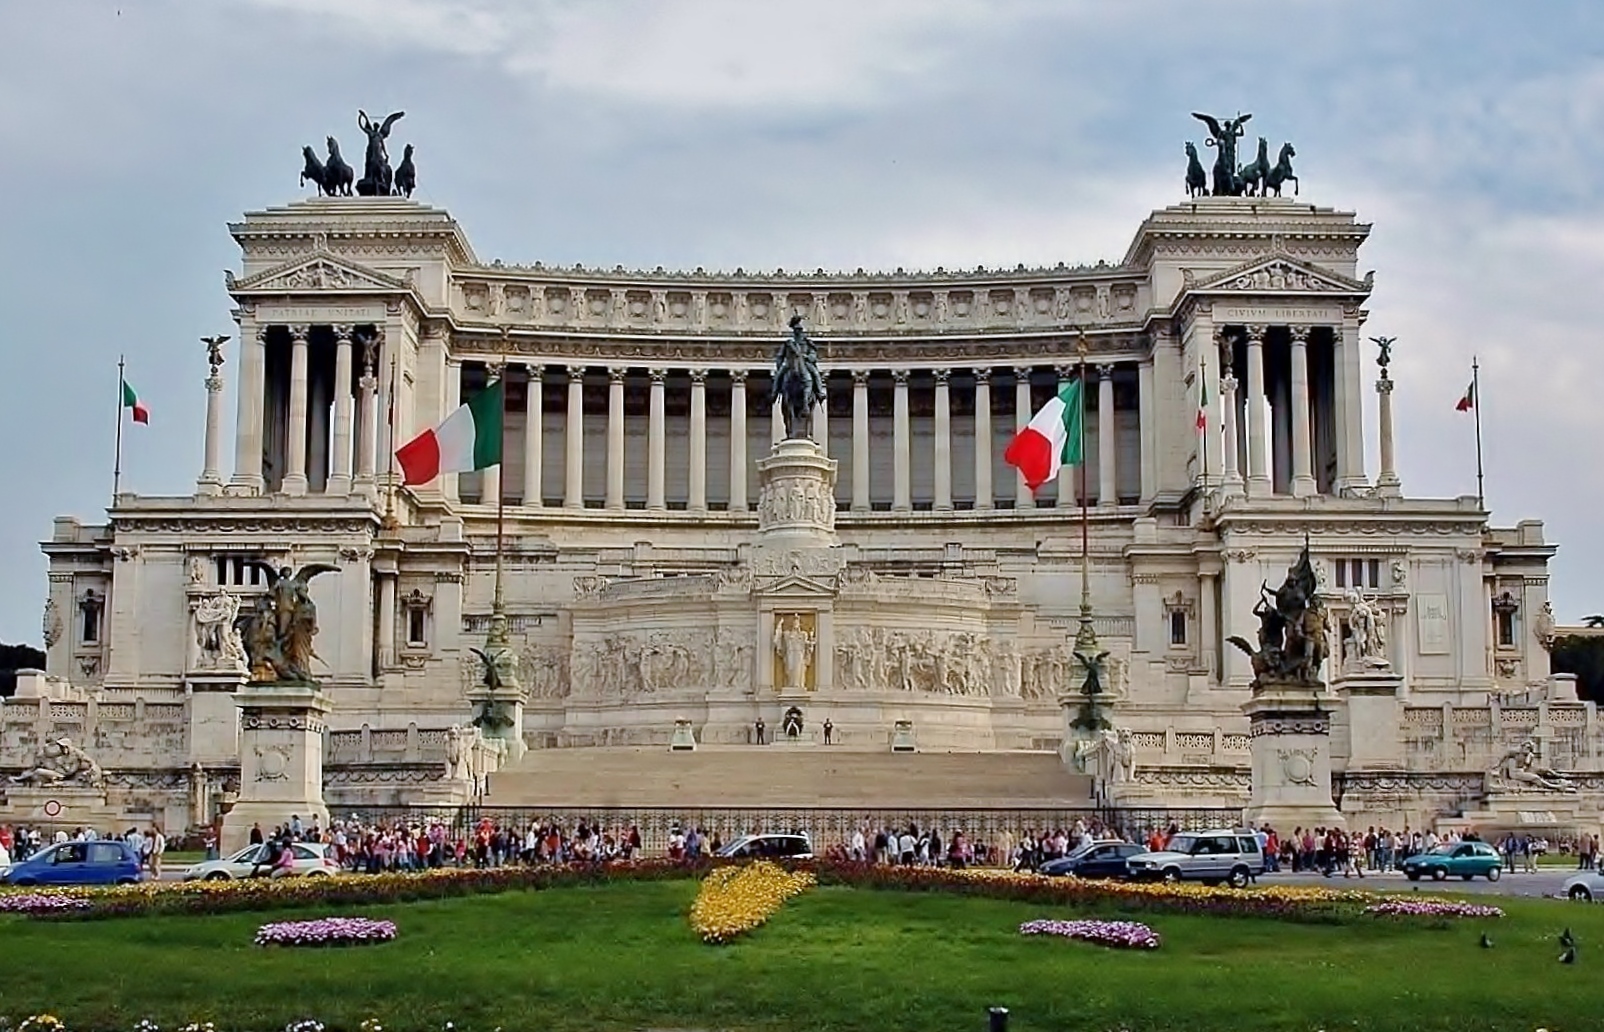 National Monument to Victor Emmanuel II.